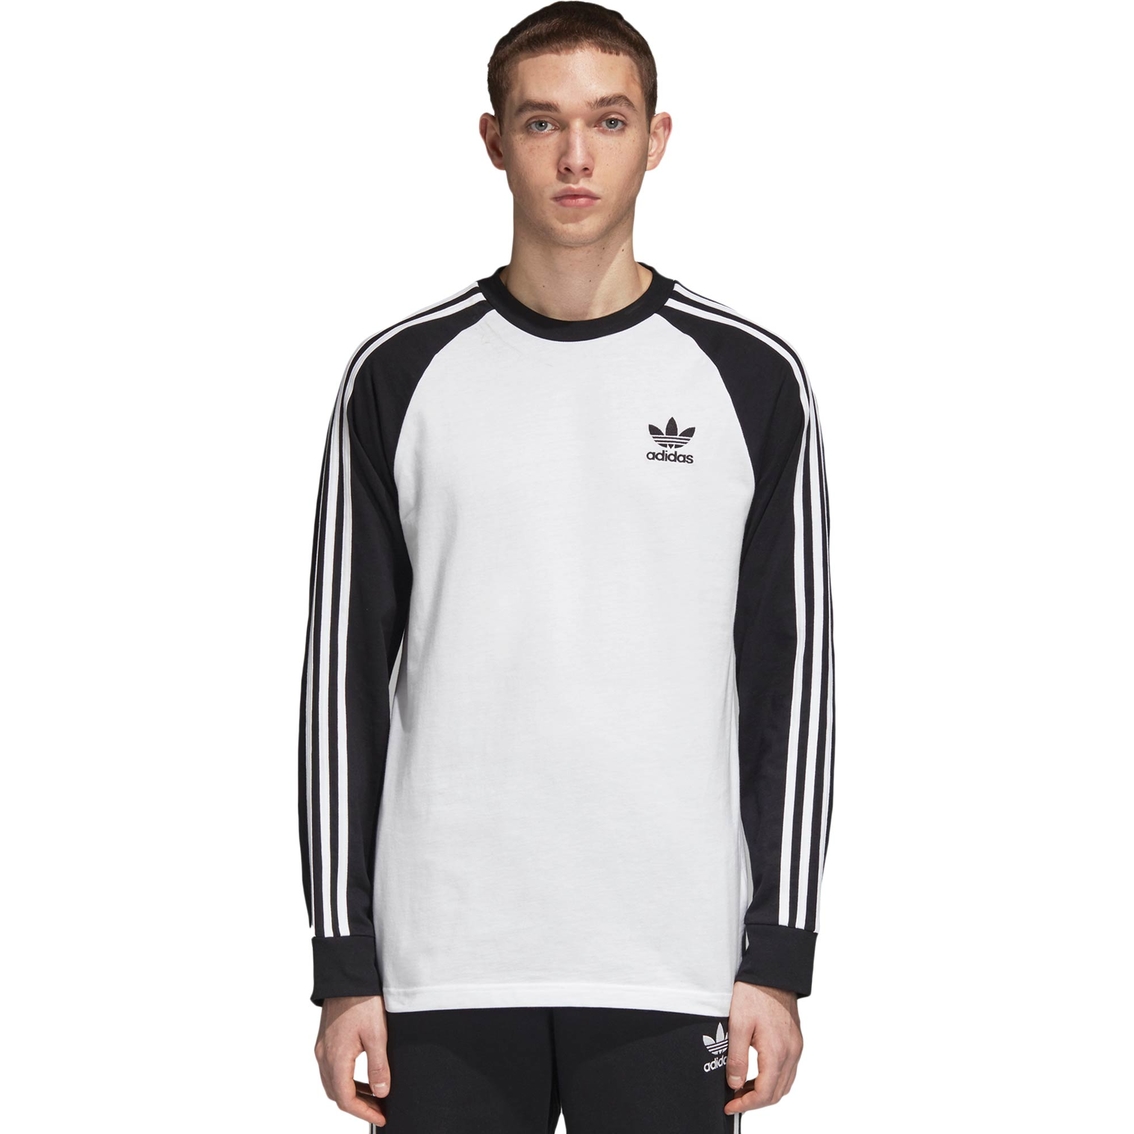 Adidas 3-stripes Tee | Shirts | Clothing & Accessories | Shop The Exchange